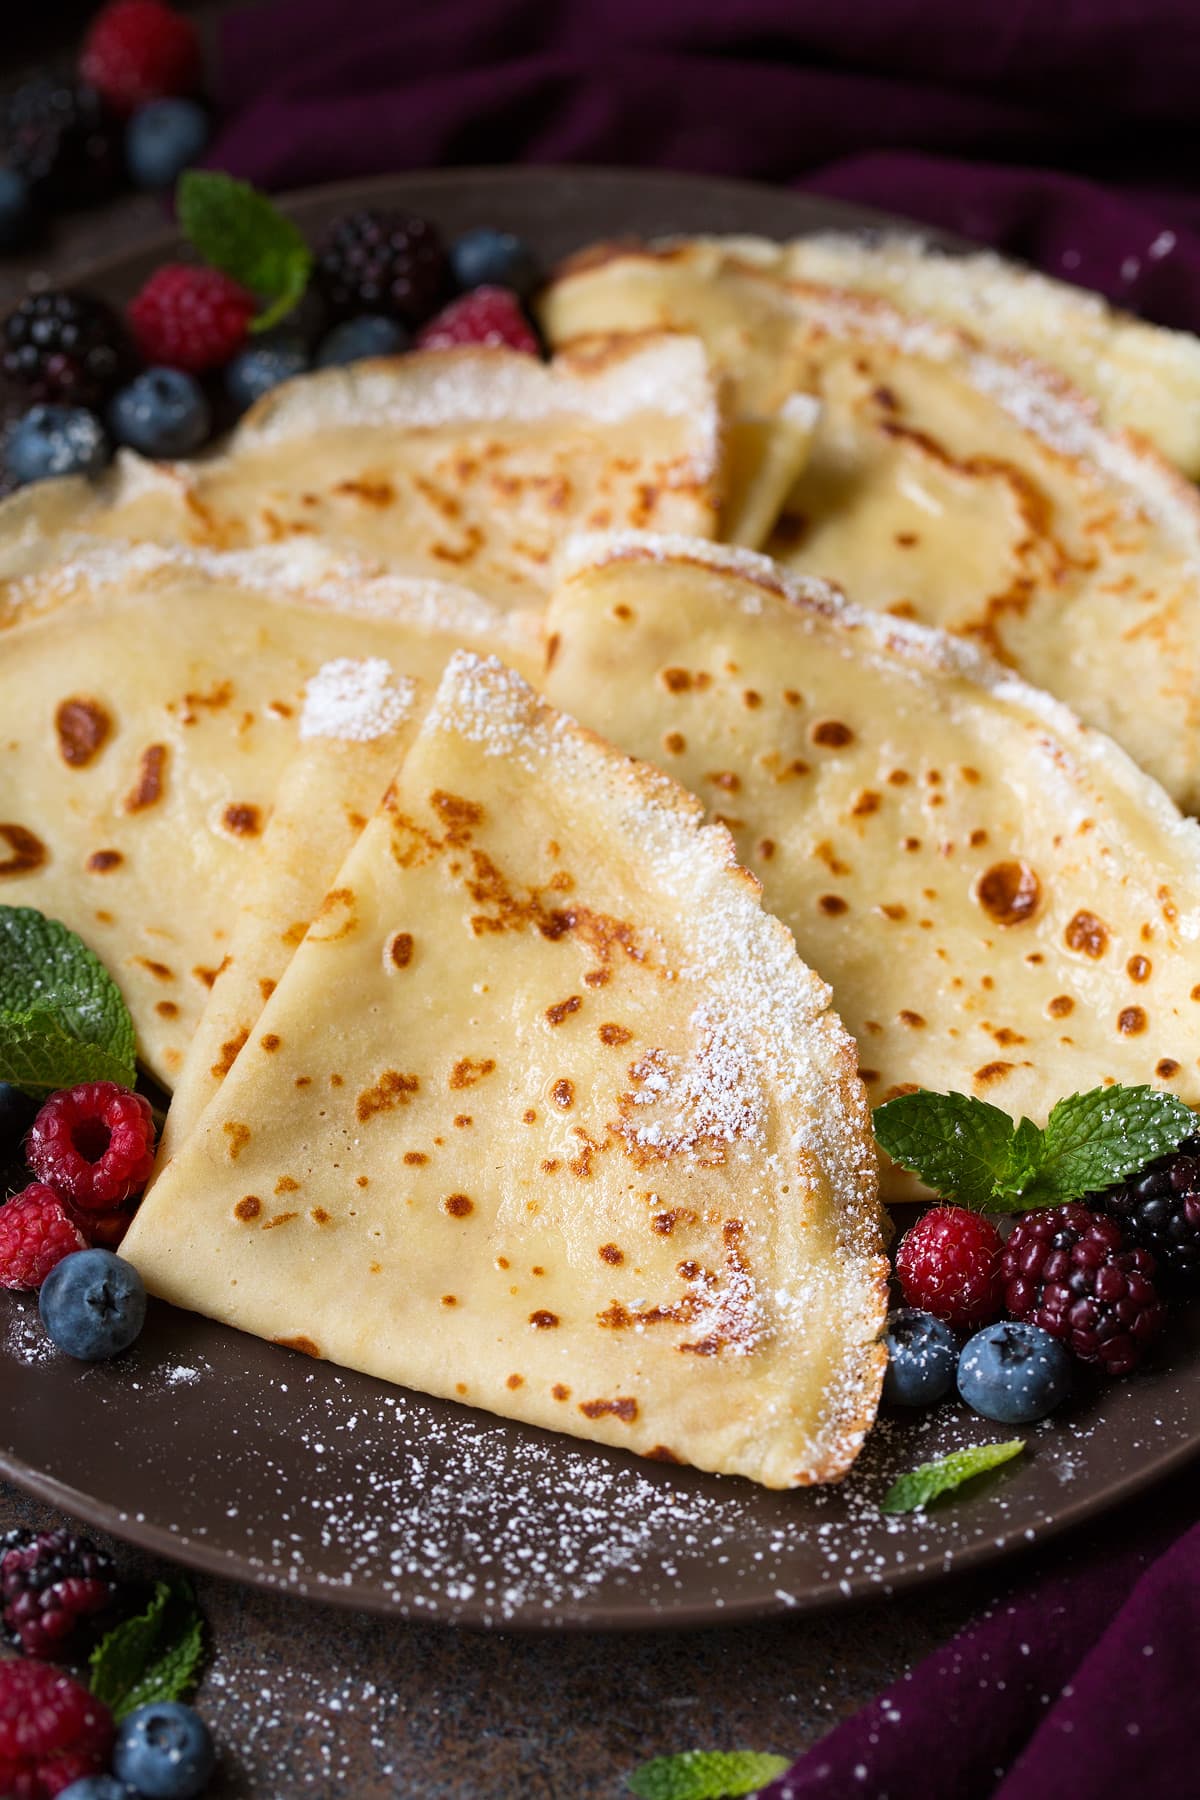 Best Crepes Recipe. Showing row of 6 crepes wrapped into quarters and dusted with powdered sugar, crepes are set on a dark brown serving plate, they're dusted with powdered sugar and served with a side of berries and mint.